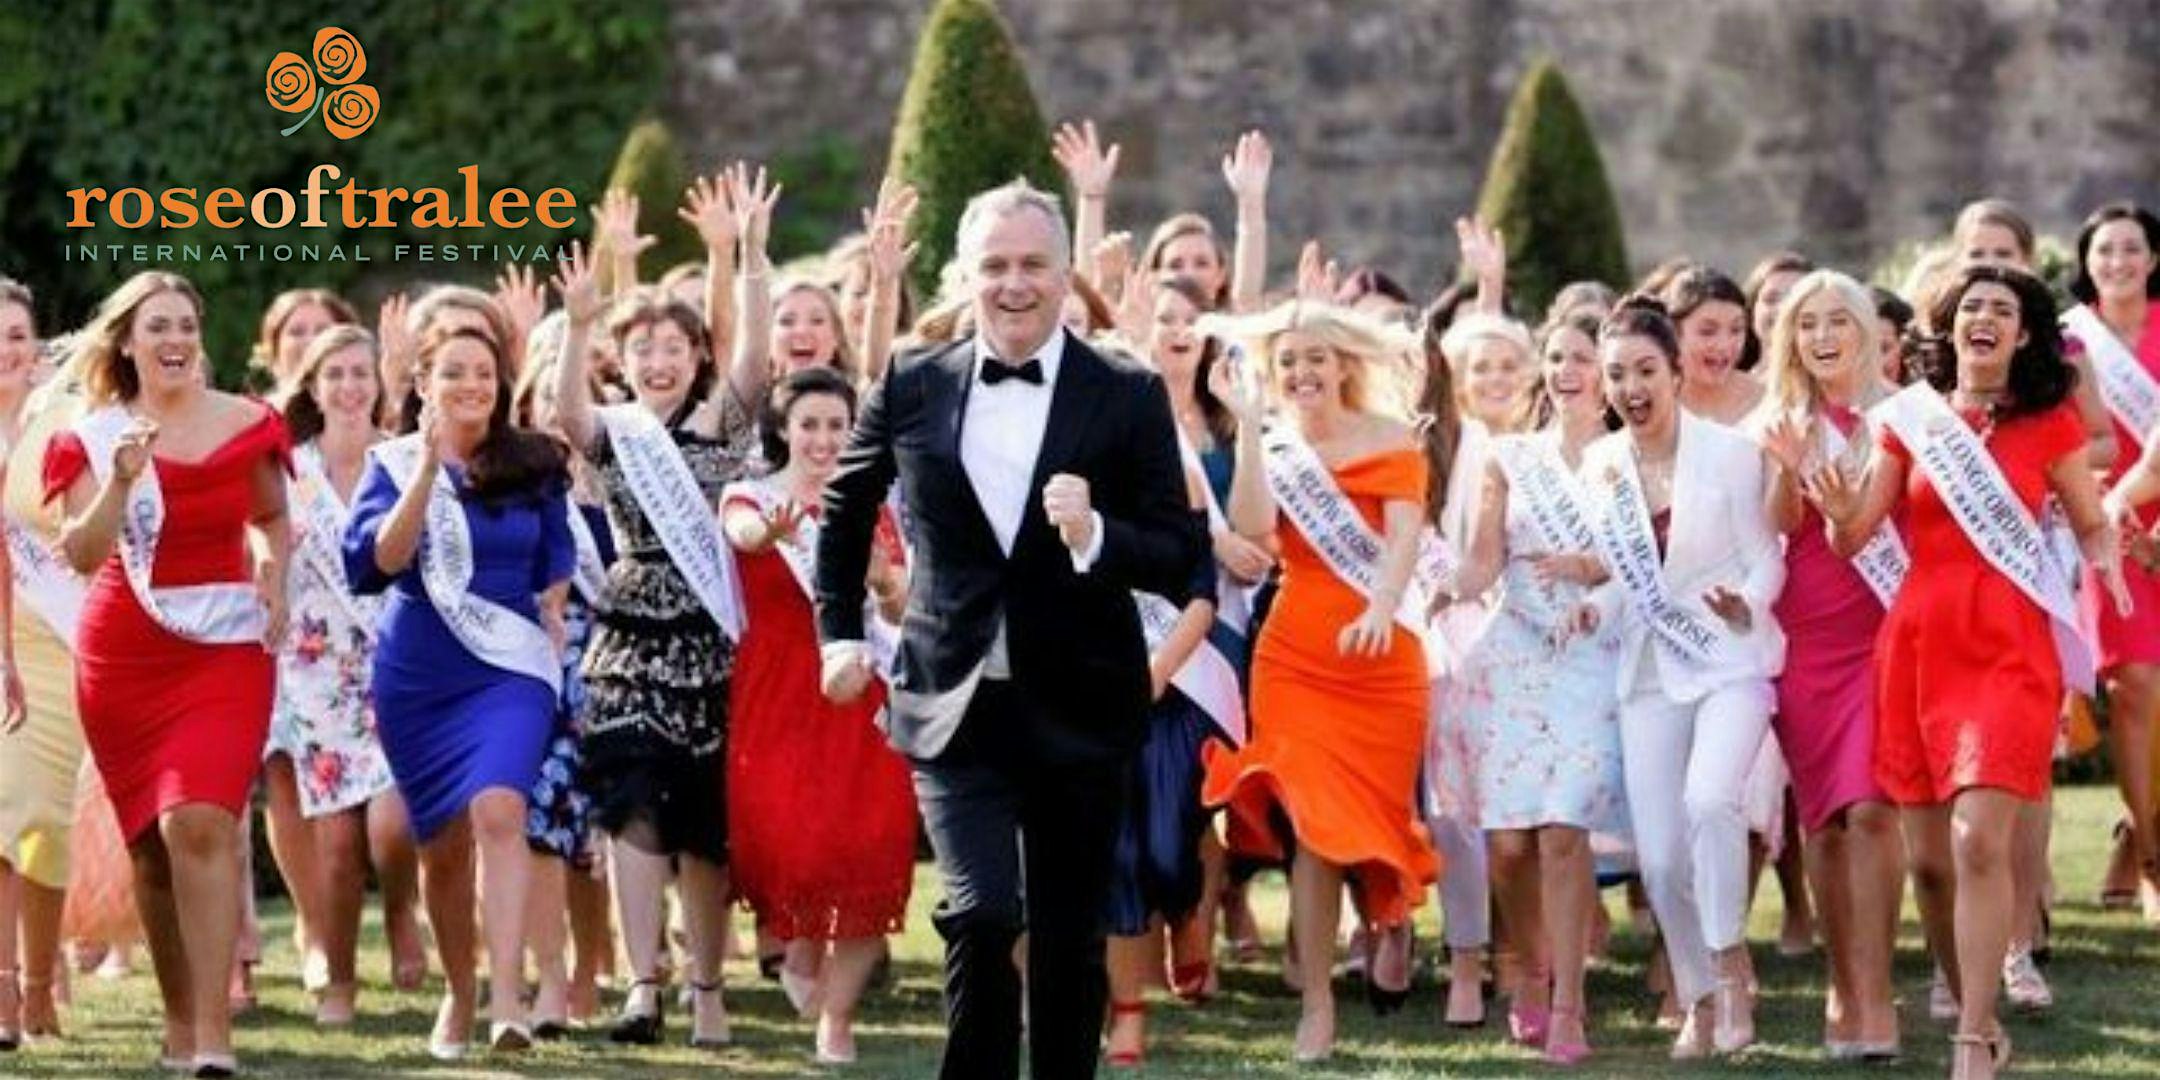 The Boston & New England Rose of Tralee Selection Festival 2023